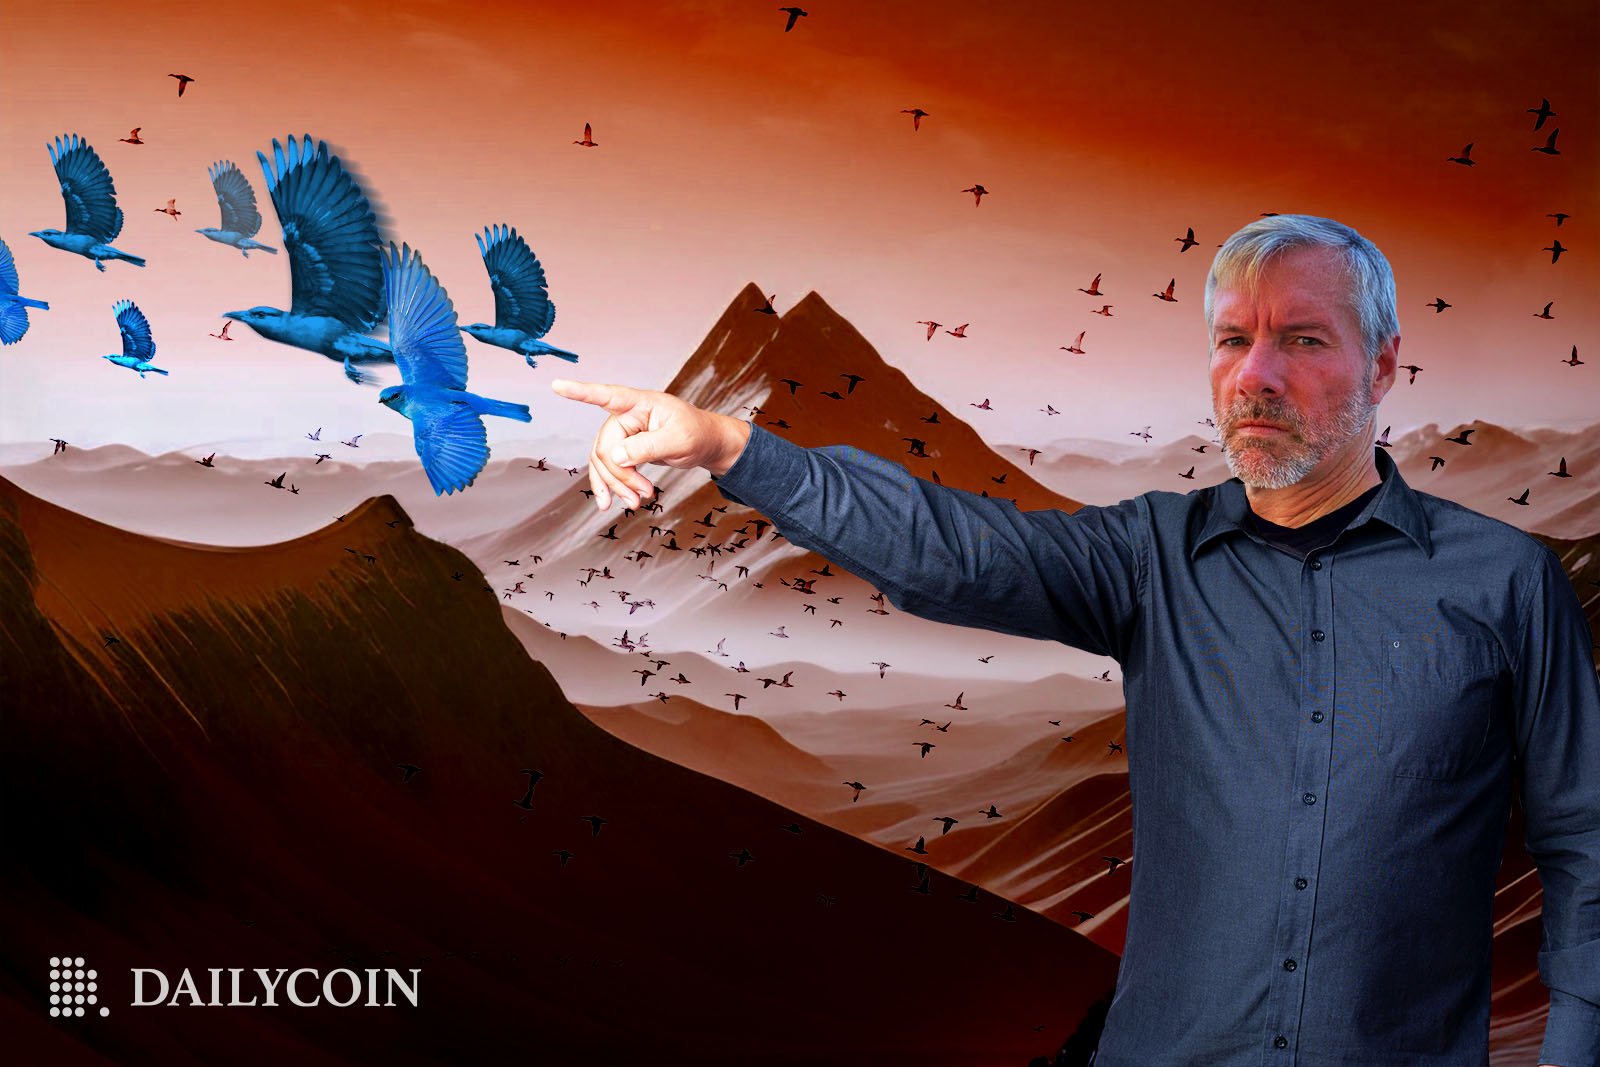 Bitcoin maximalist Michael Saylor pointing the finger at blue birds in a mountainous background.